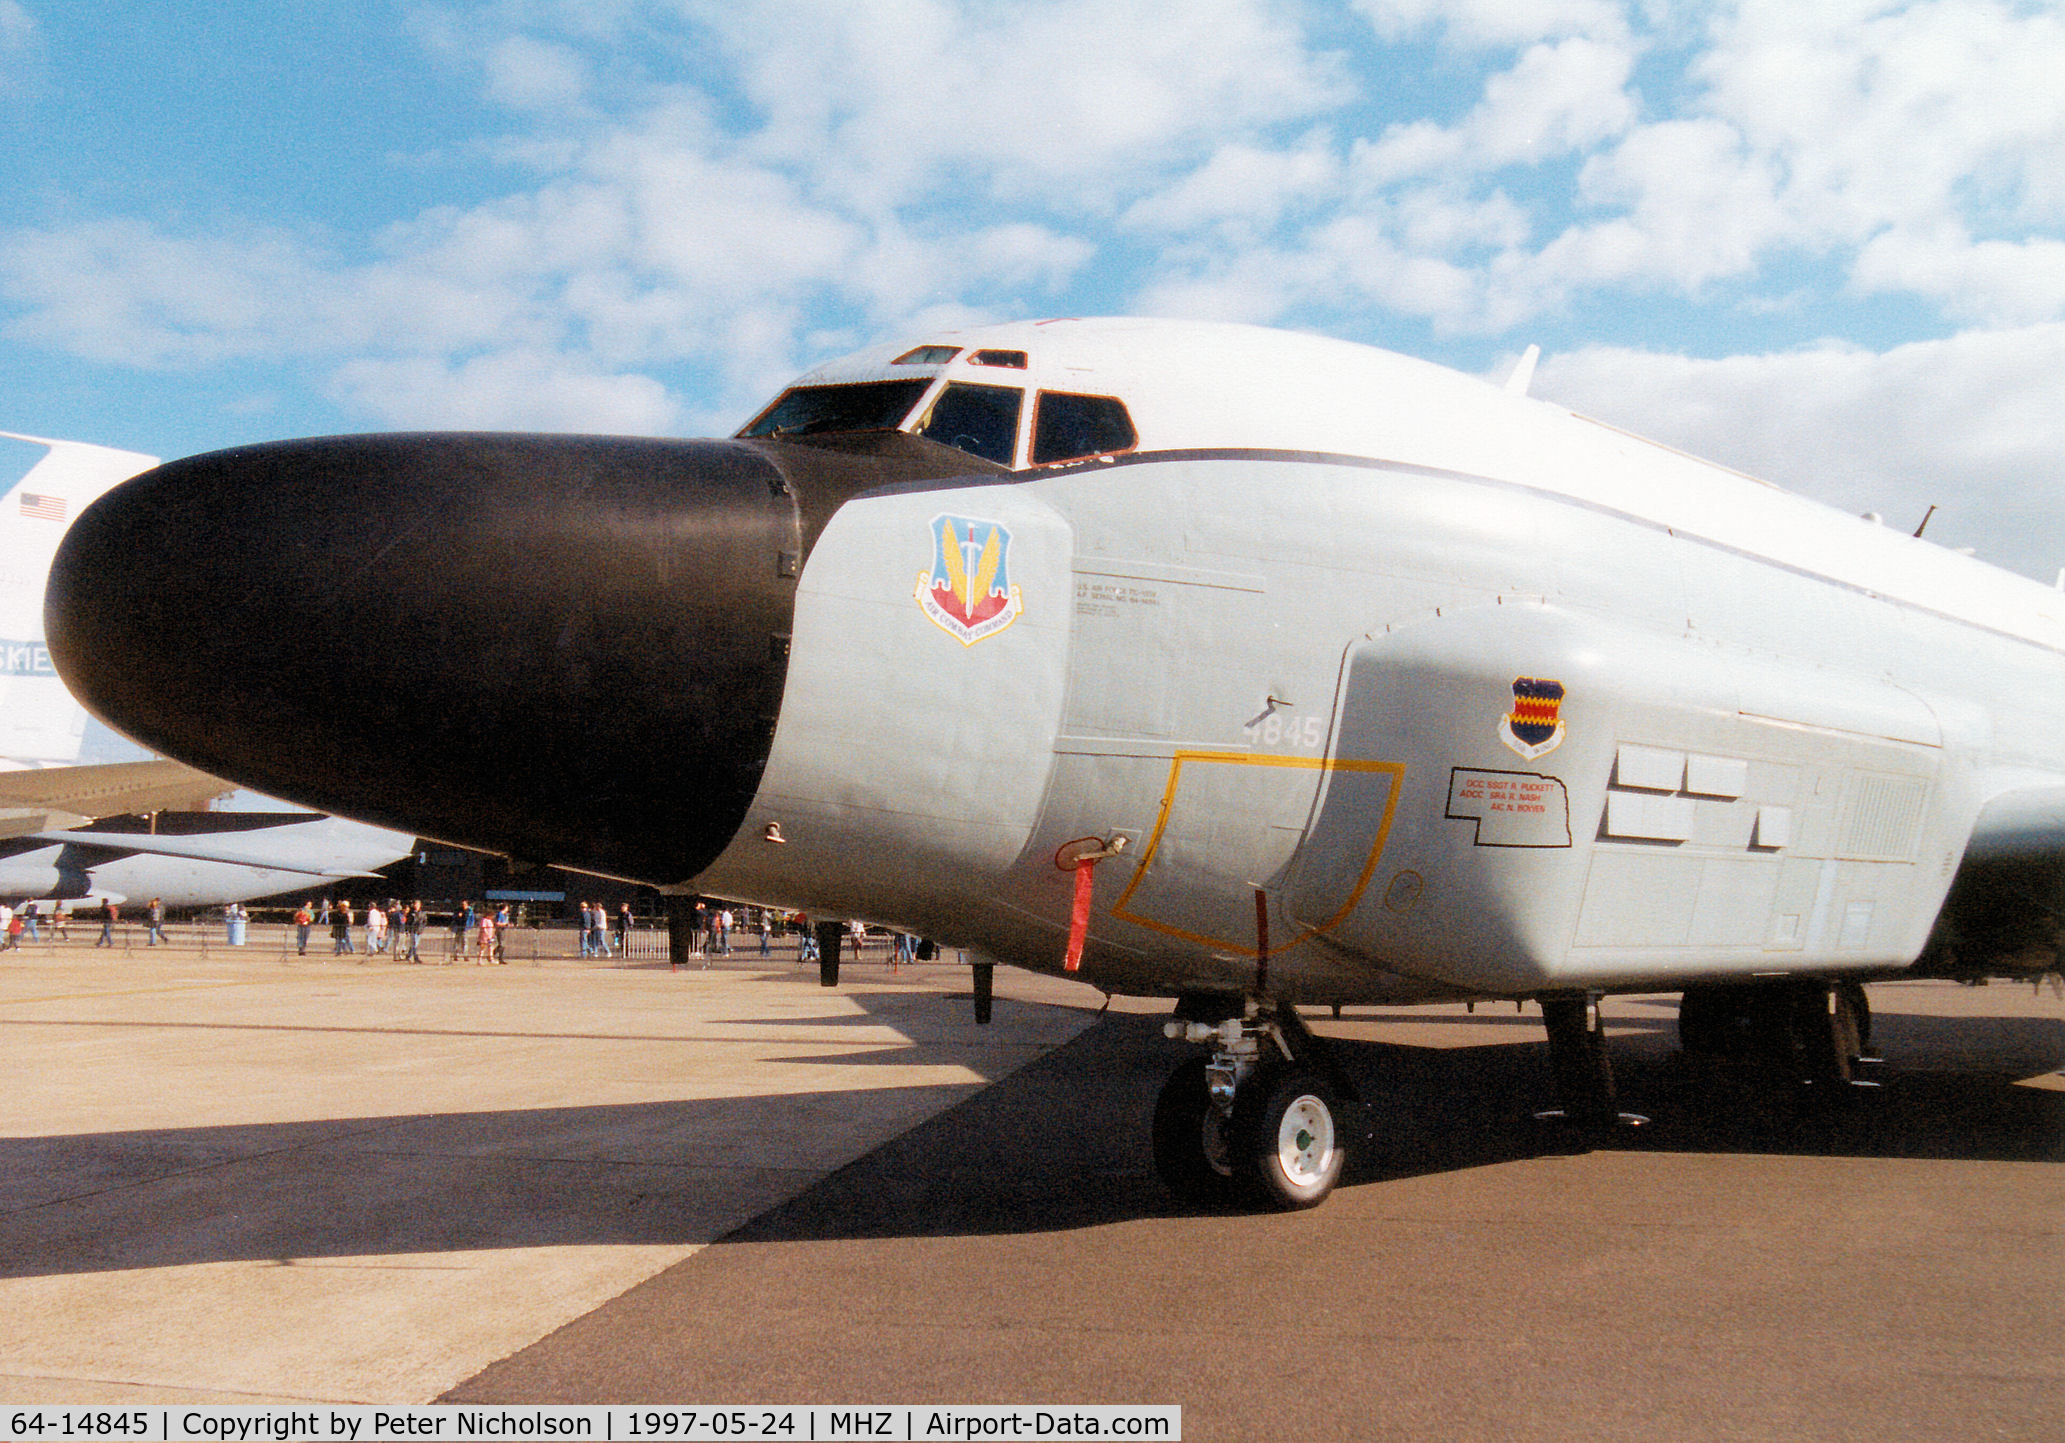 64-14845, Boeing RC-135V Rivet Joint C/N 18785, Another view of the RC-135V Rivet Joint intelligence aircraft of Offutt AFB's 55 Wing on display at the 1997 RAF Mildenhall Air Fete.